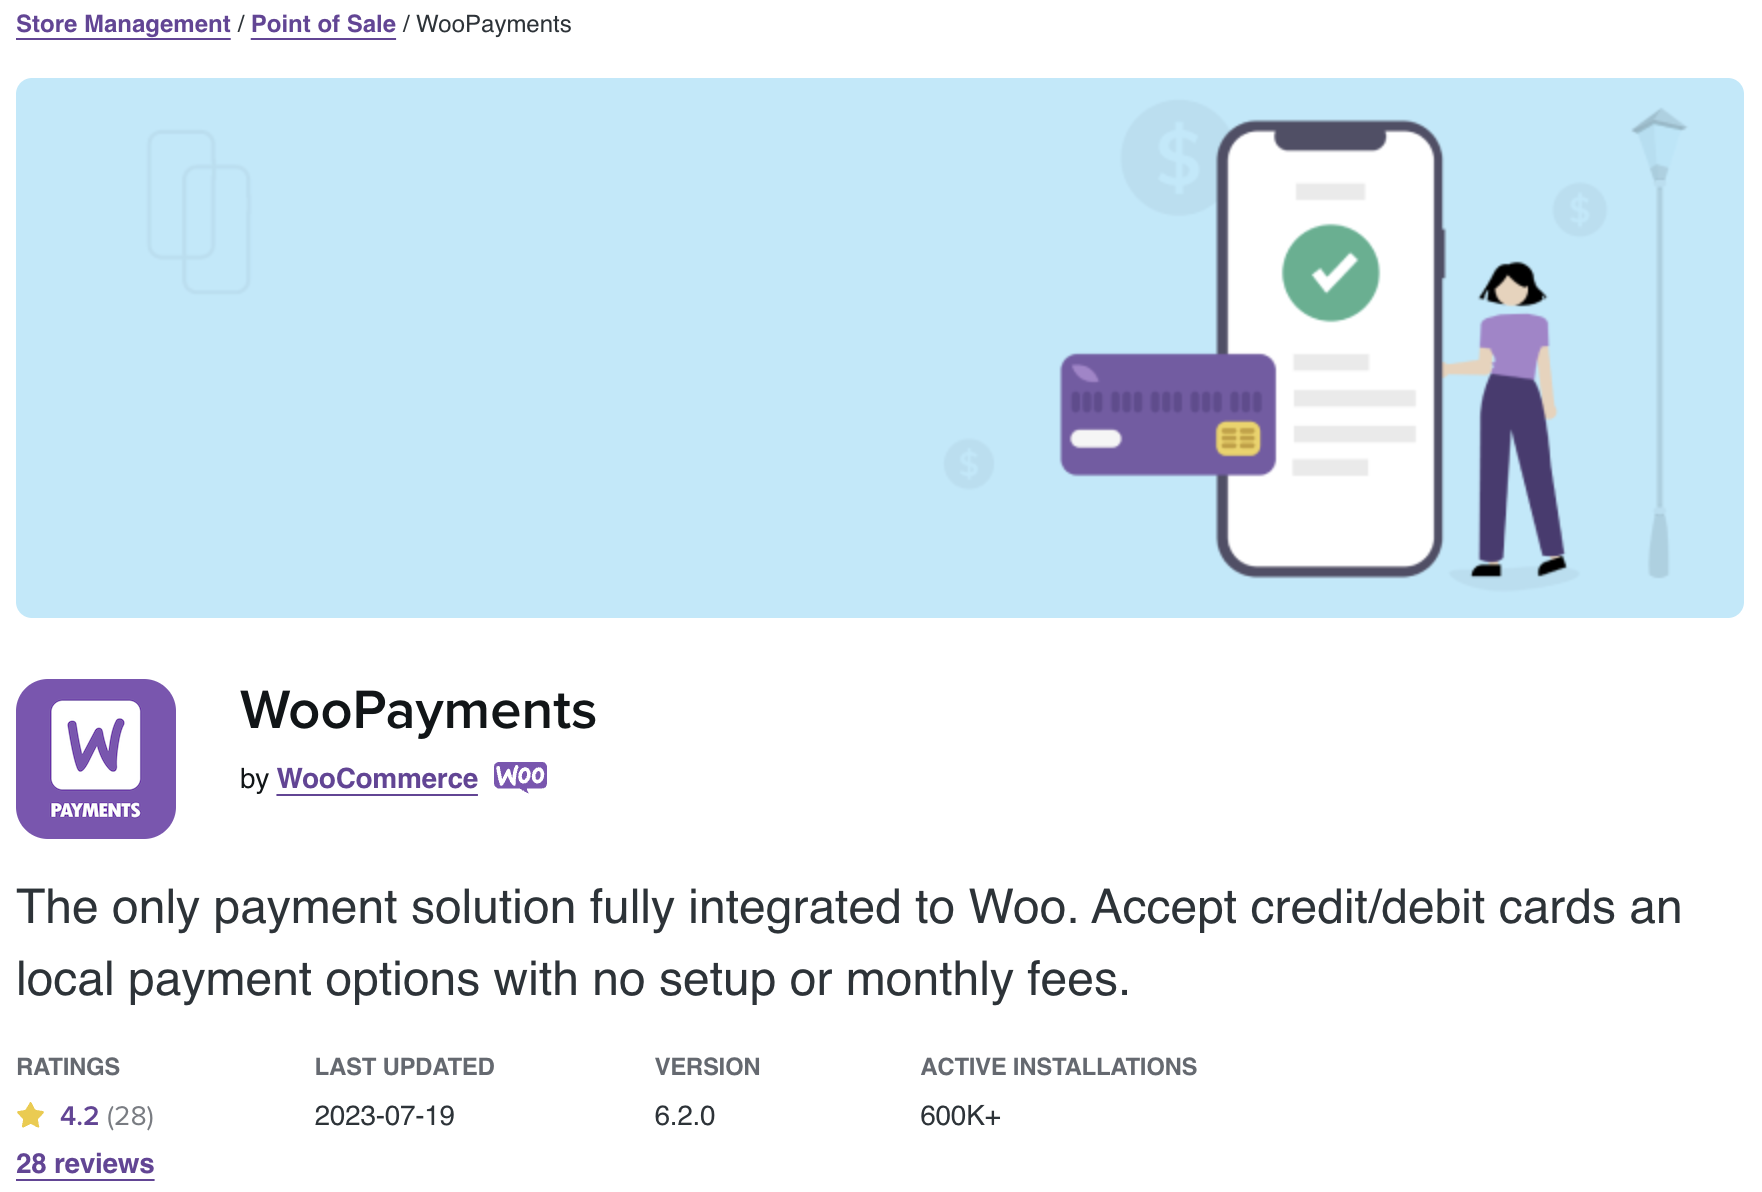 WooPayments product page